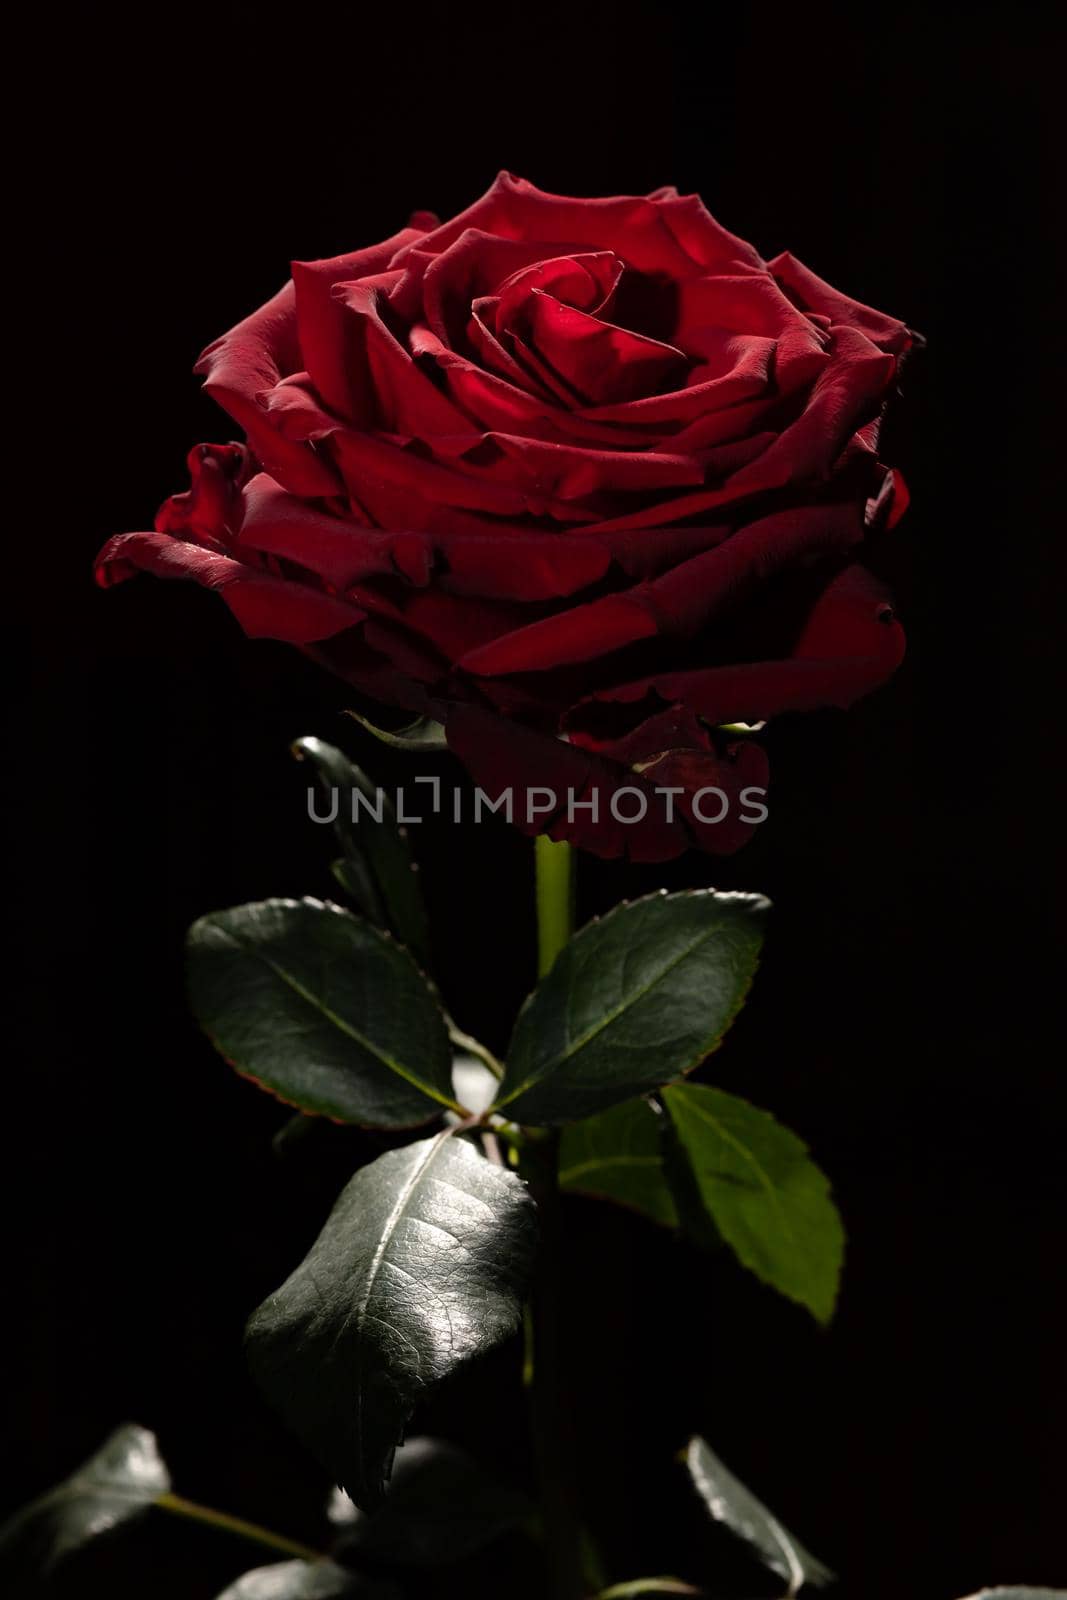 Blooming red rose bud in water drops on a black background, use as background, wallpaper, greeting card